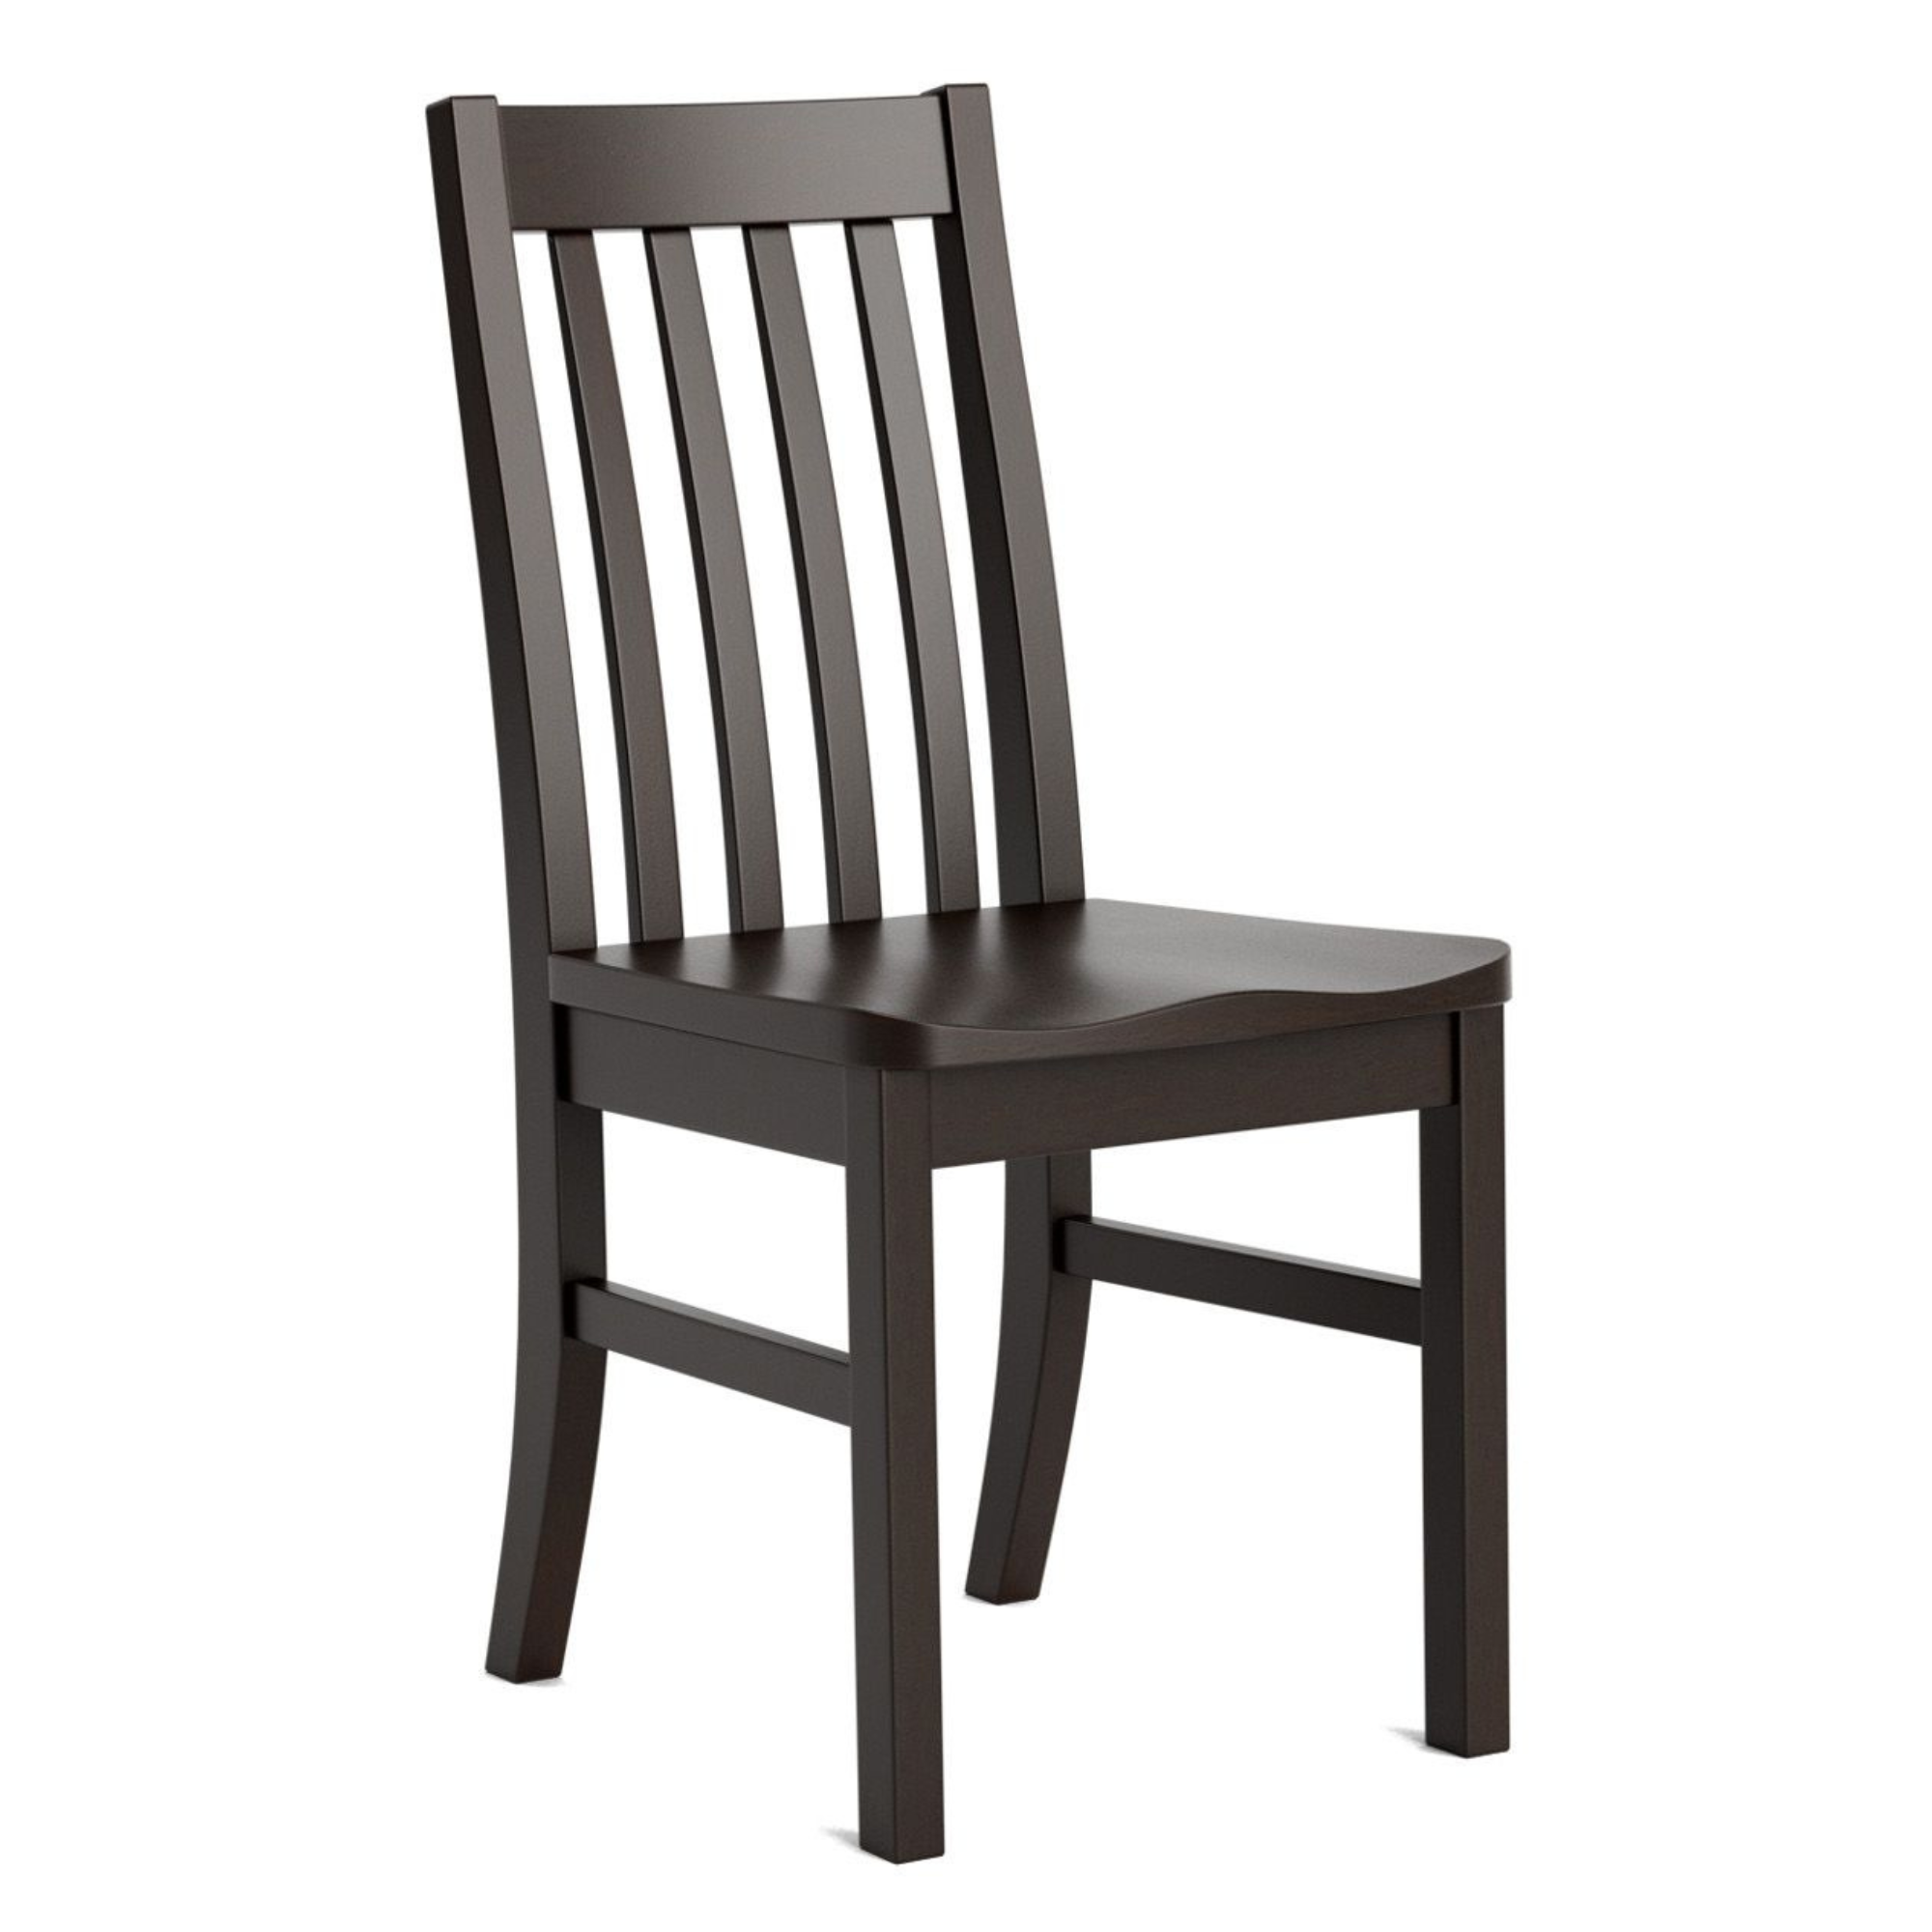 VILLAGER DISHED SEAT DINING CHAIR | NZ MADE